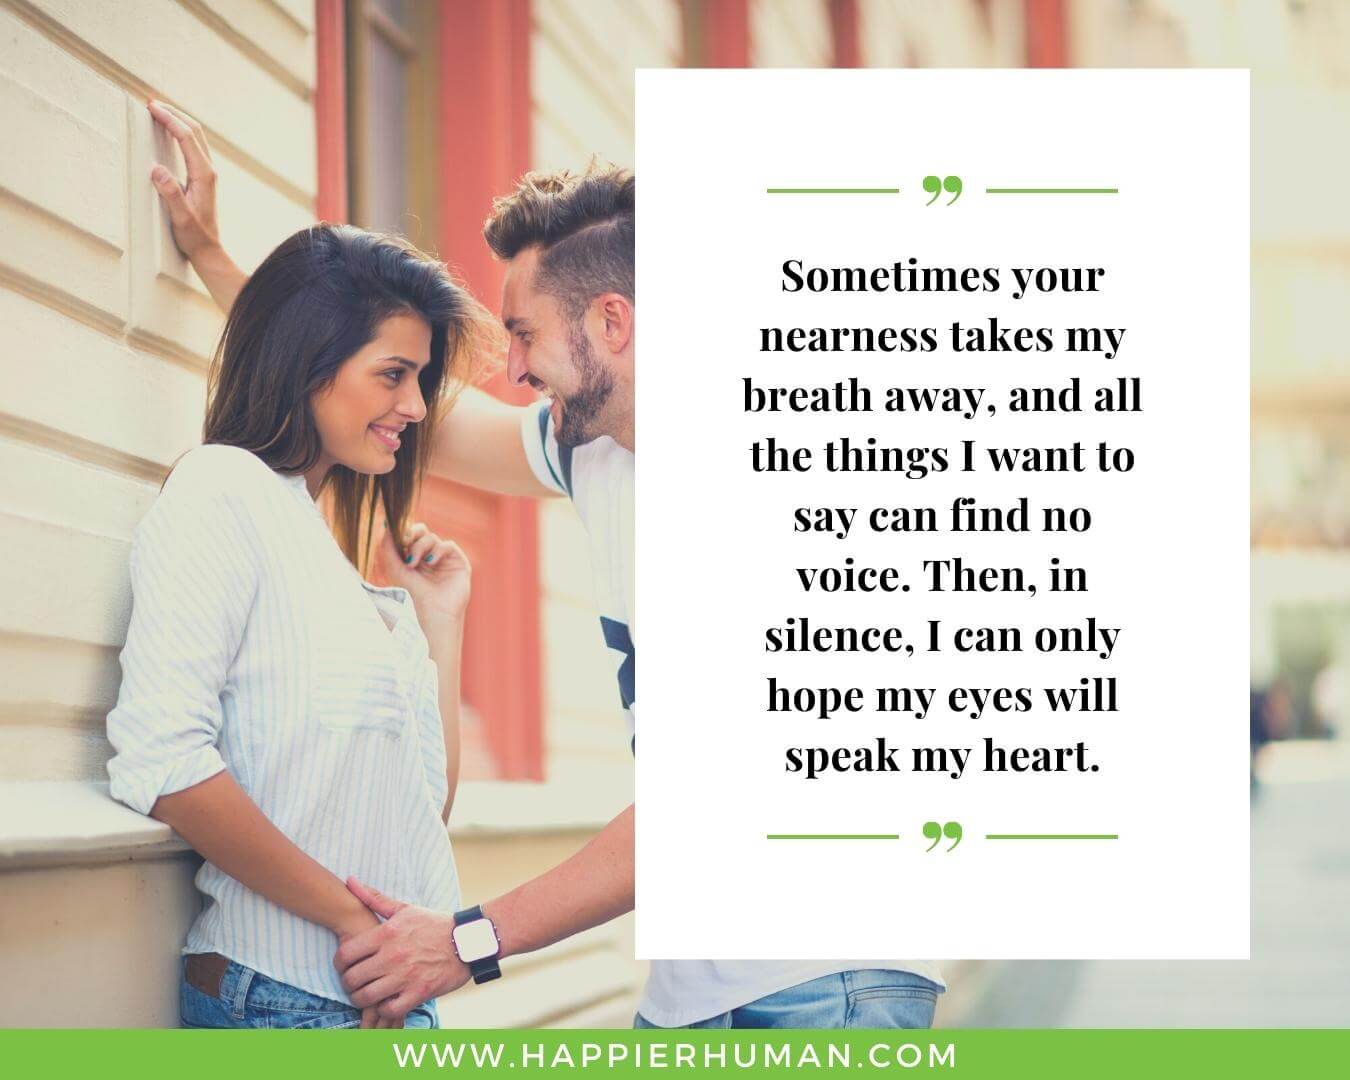 Unconditional Love Quotes for Her - “Sometimes your nearness takes my breath away, and all the things I want to say can find no voice. Then, in silence, I can only hope my eyes will speak my heart.”